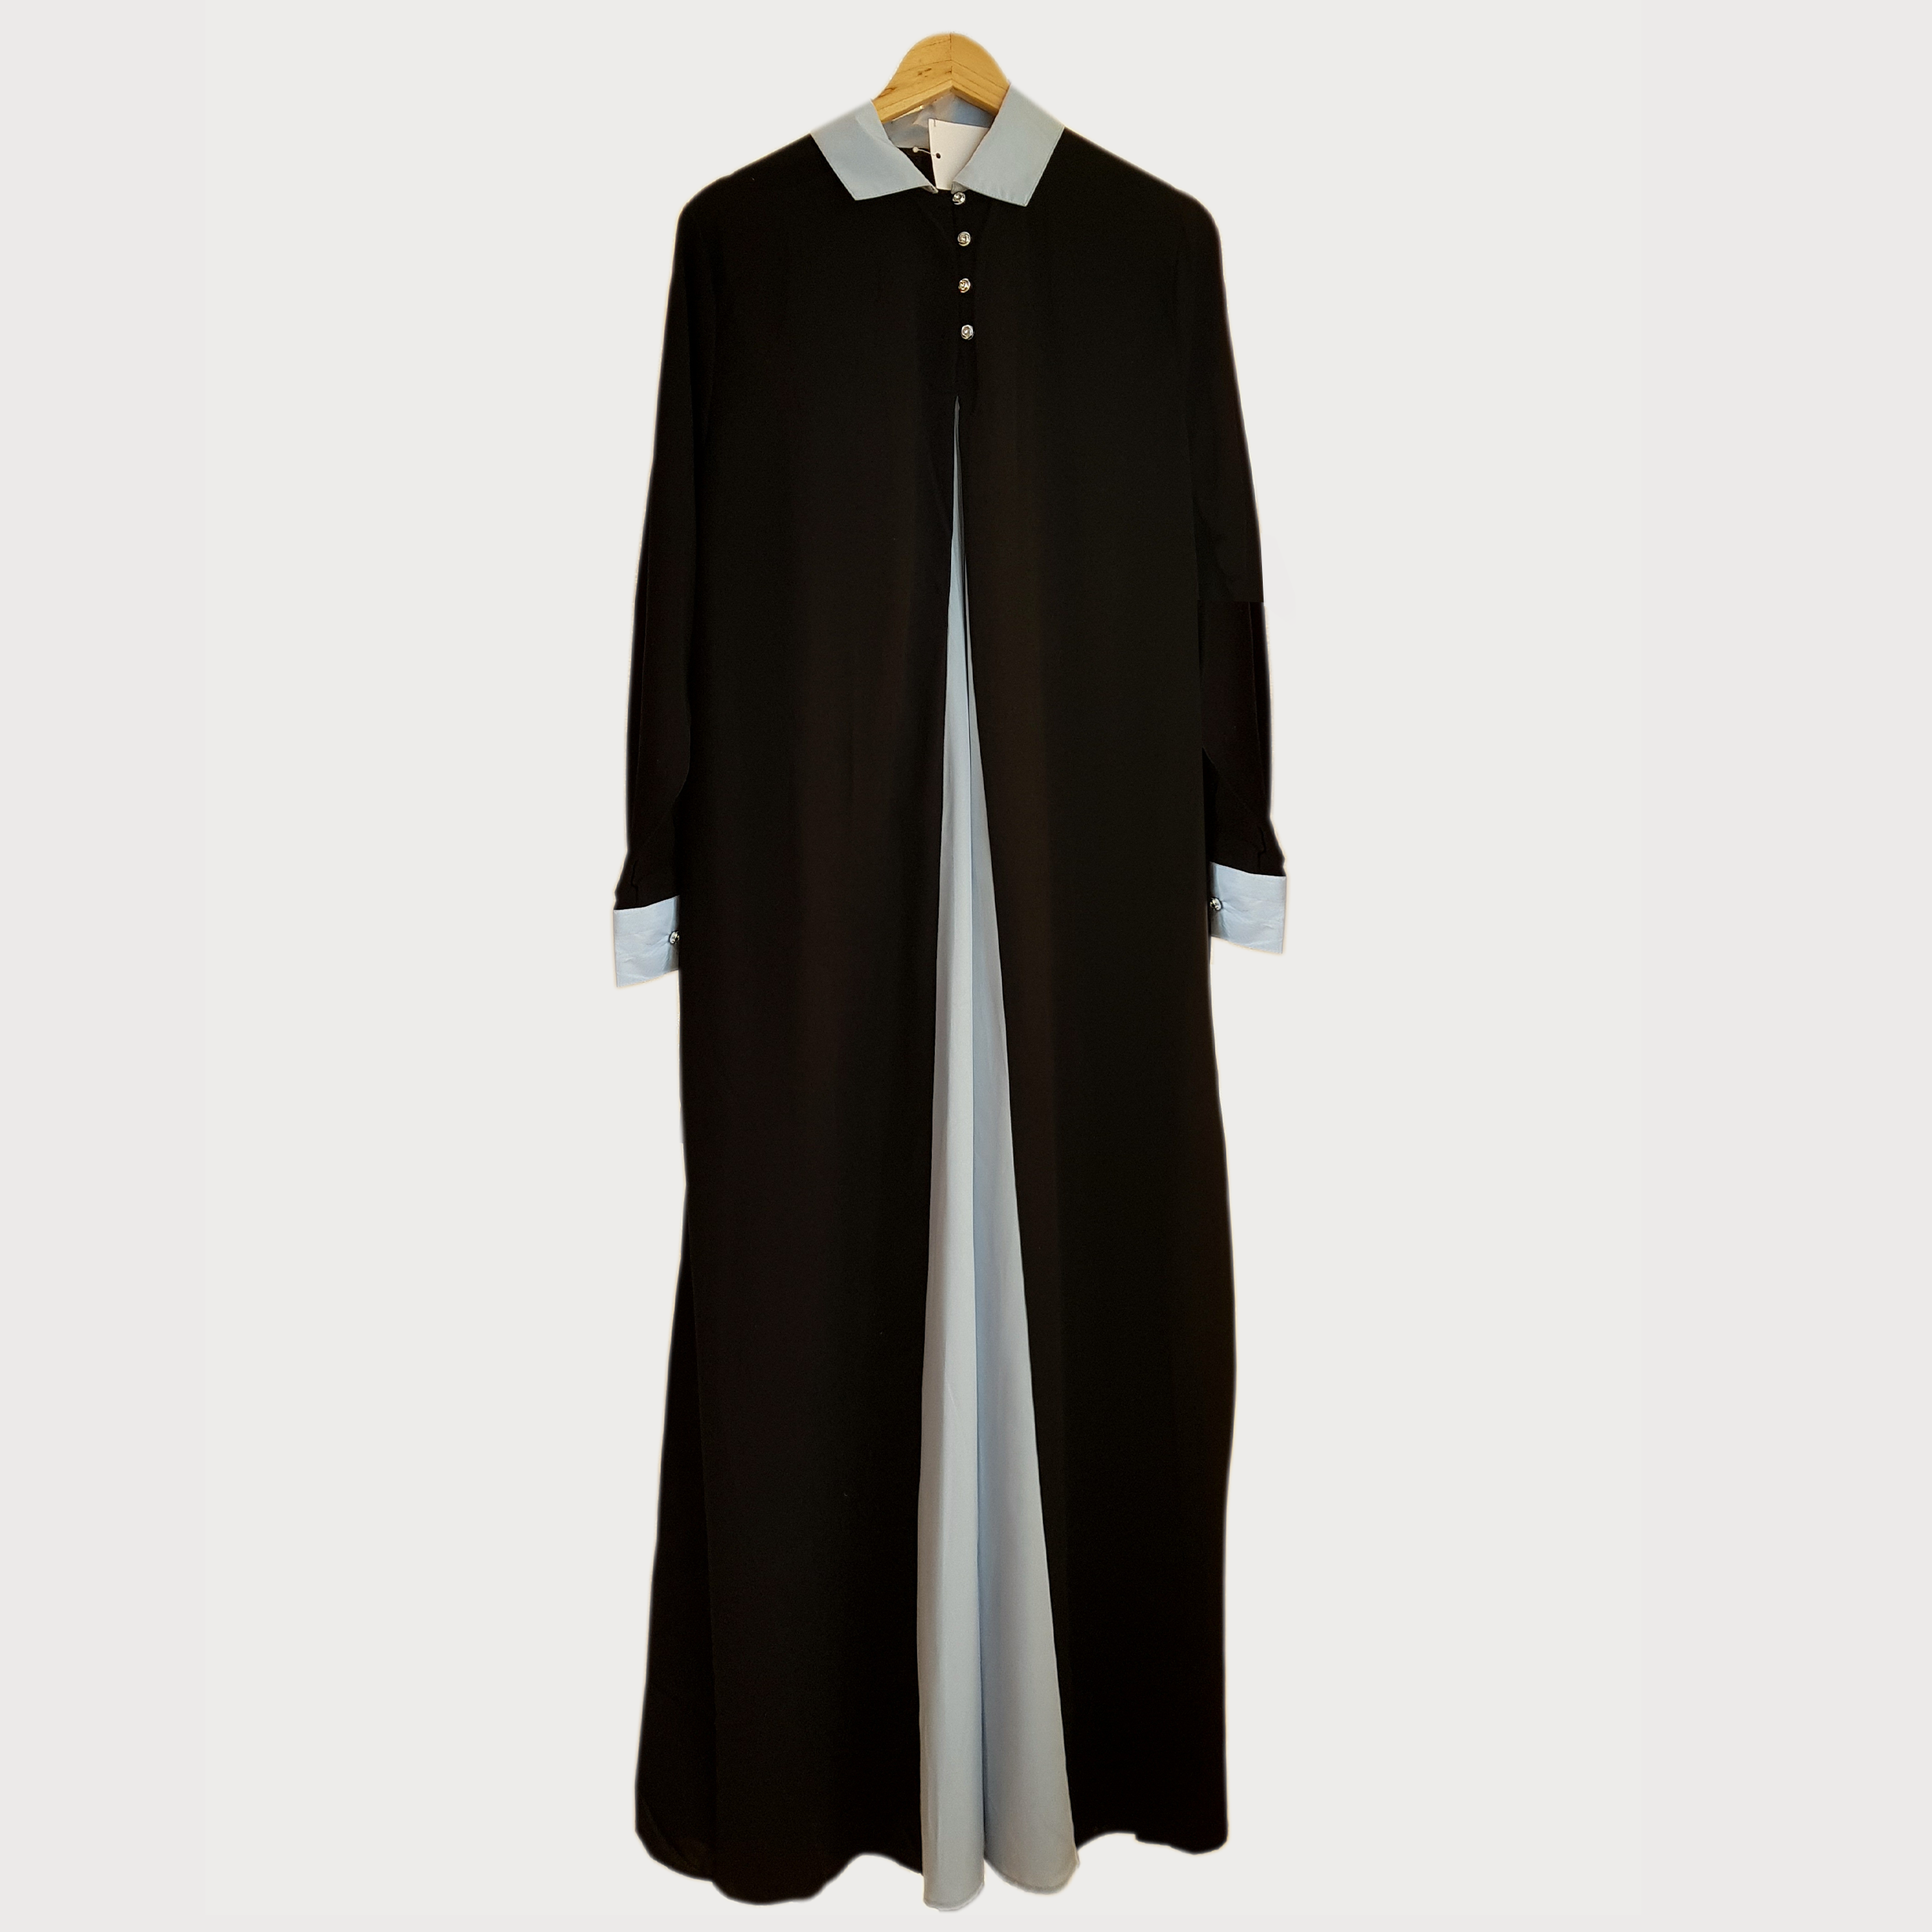 Two-Tone Collared Button-Up Abaya